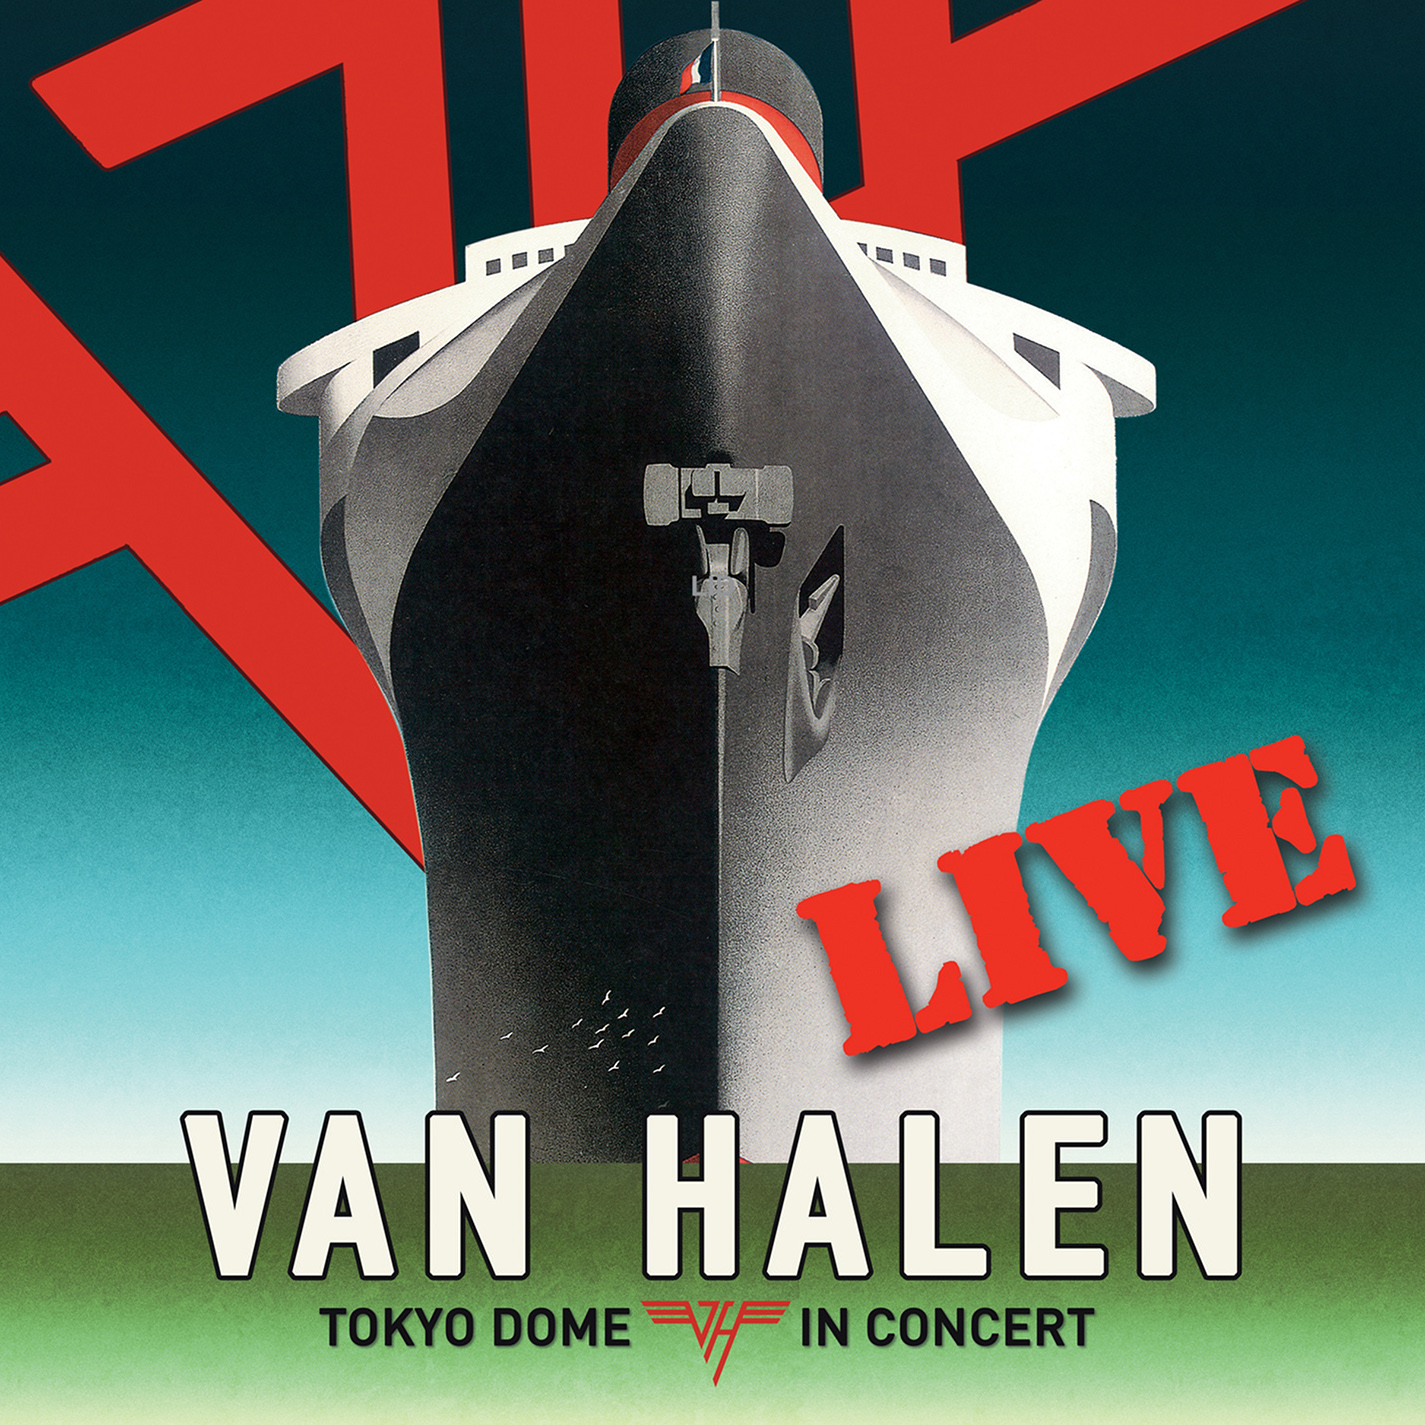 Van Halen To Reissue Two Classic Albums, And Add A New Live Album